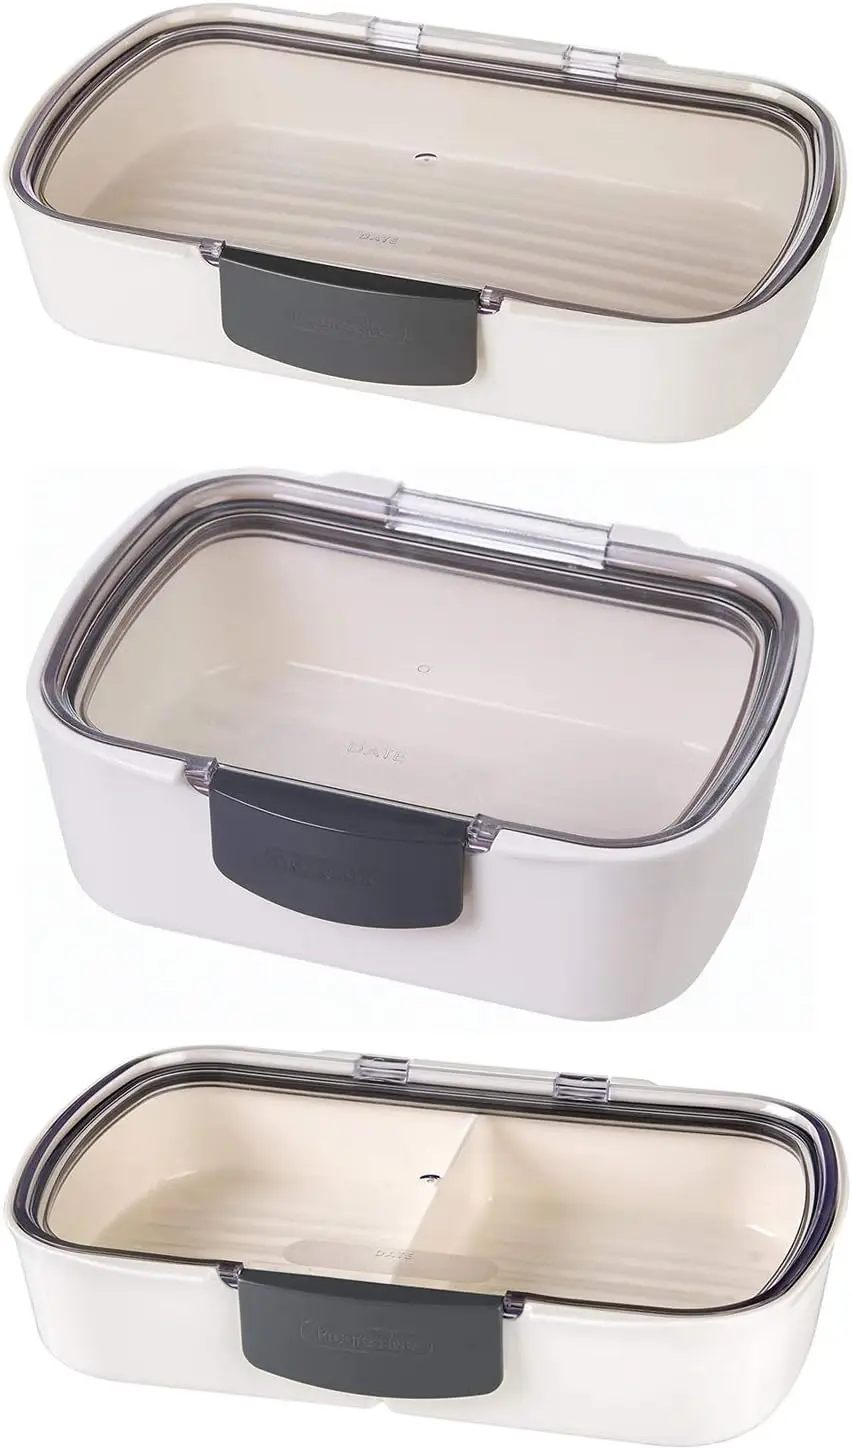 

Air Tight Sealed Food Storage Container 3 Piece Set Insulated lunch box Picnic Lunch box warmer heat boxes Bolsa térmica almuer